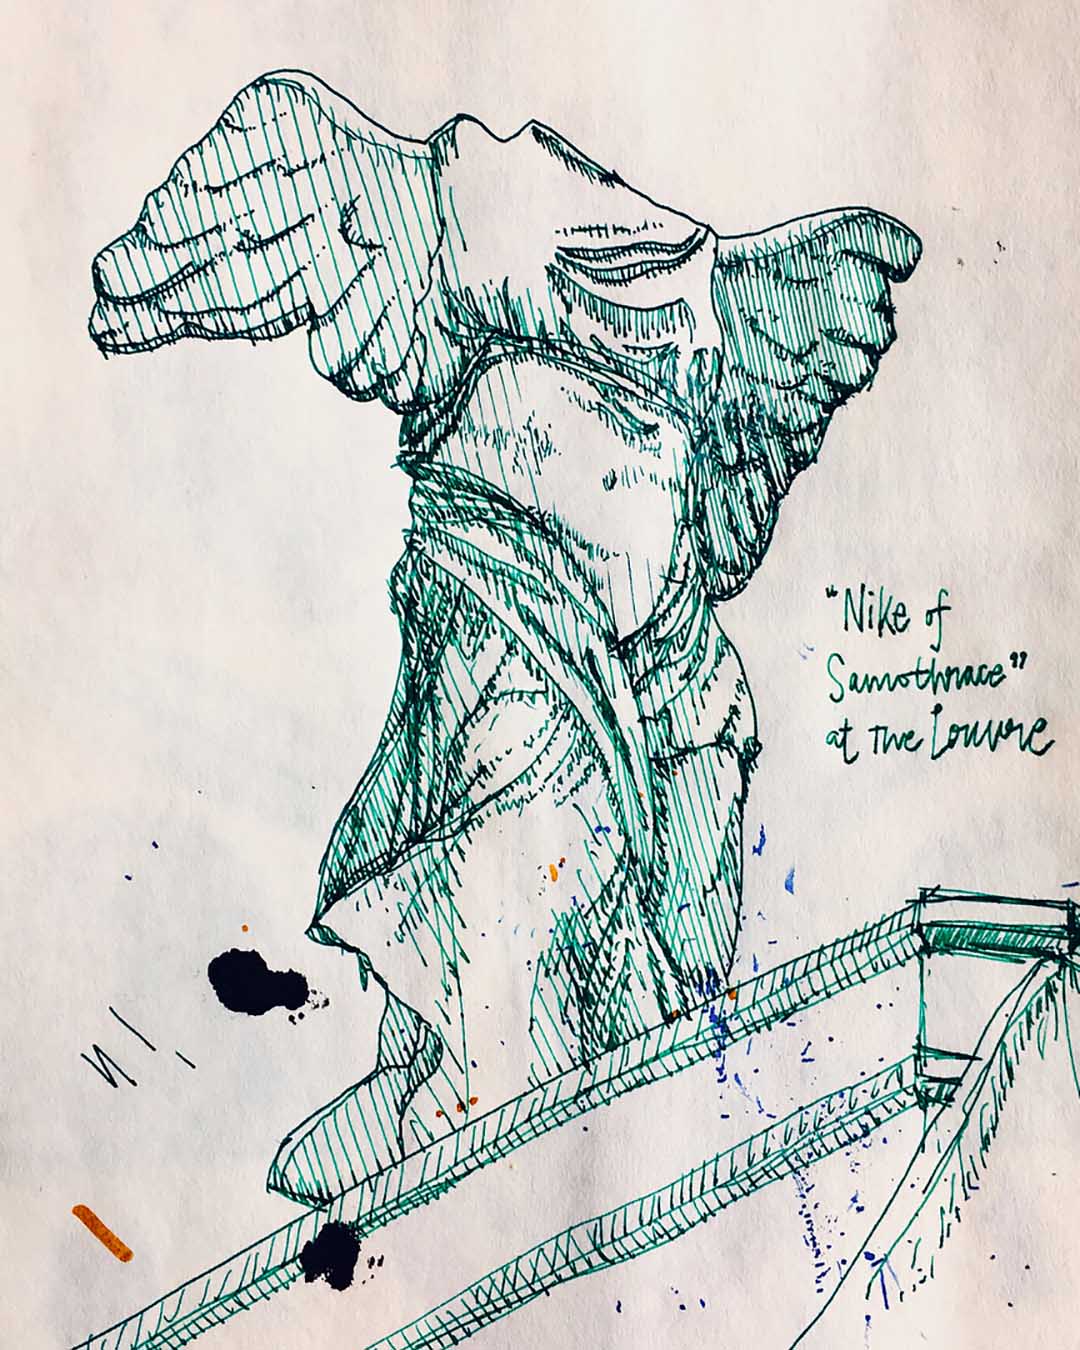 A green-ink sketch of the headless sculpture Nike of Samothrace at the Louvre